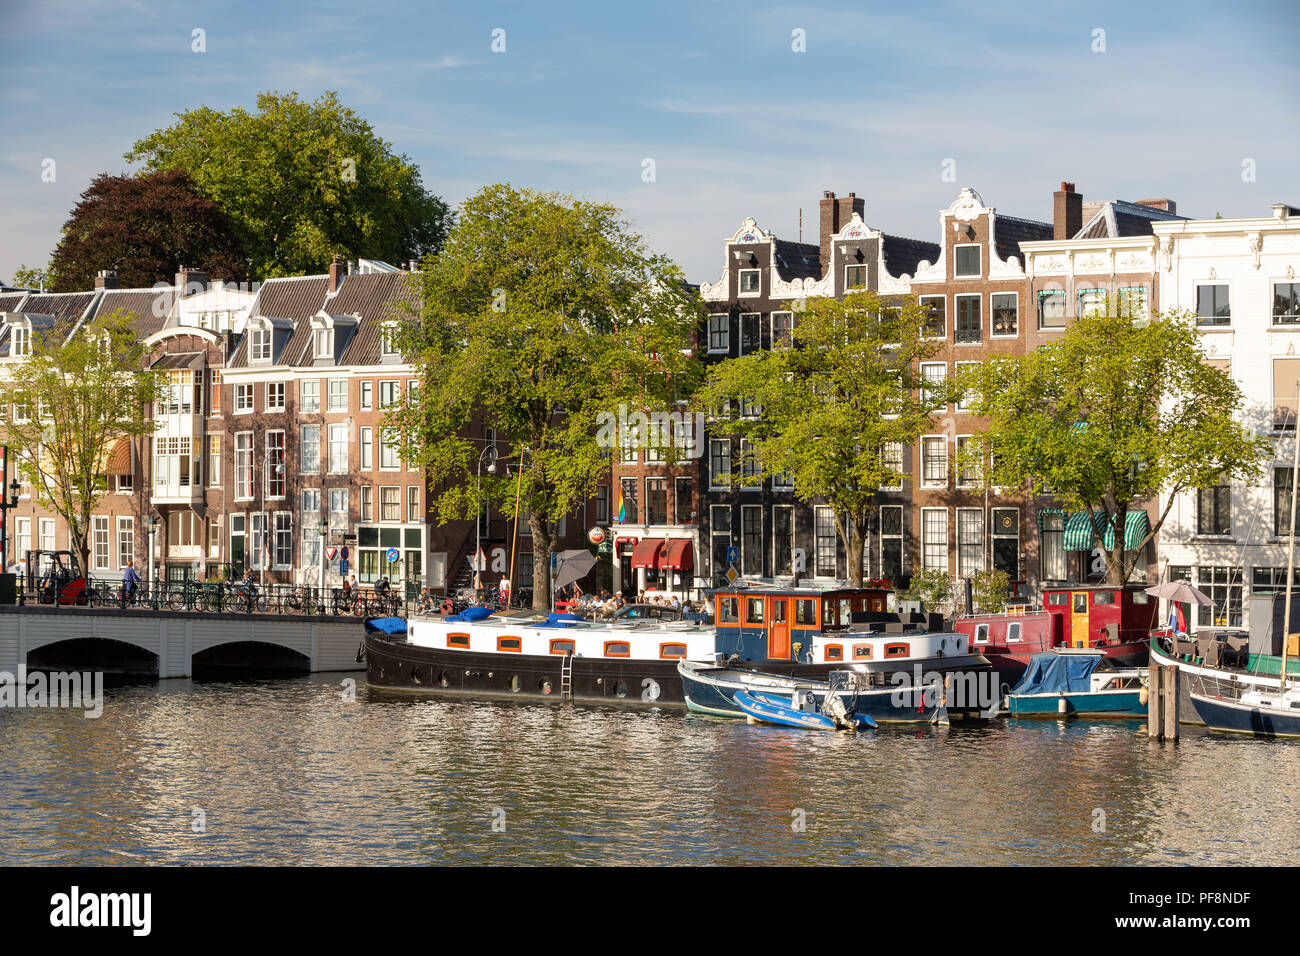 AMSTERDAM, THE NETHERLANDS - AUGUST 6, 2018: a large house boat on the Amstel river with the traditional canal houses. Stock Photo